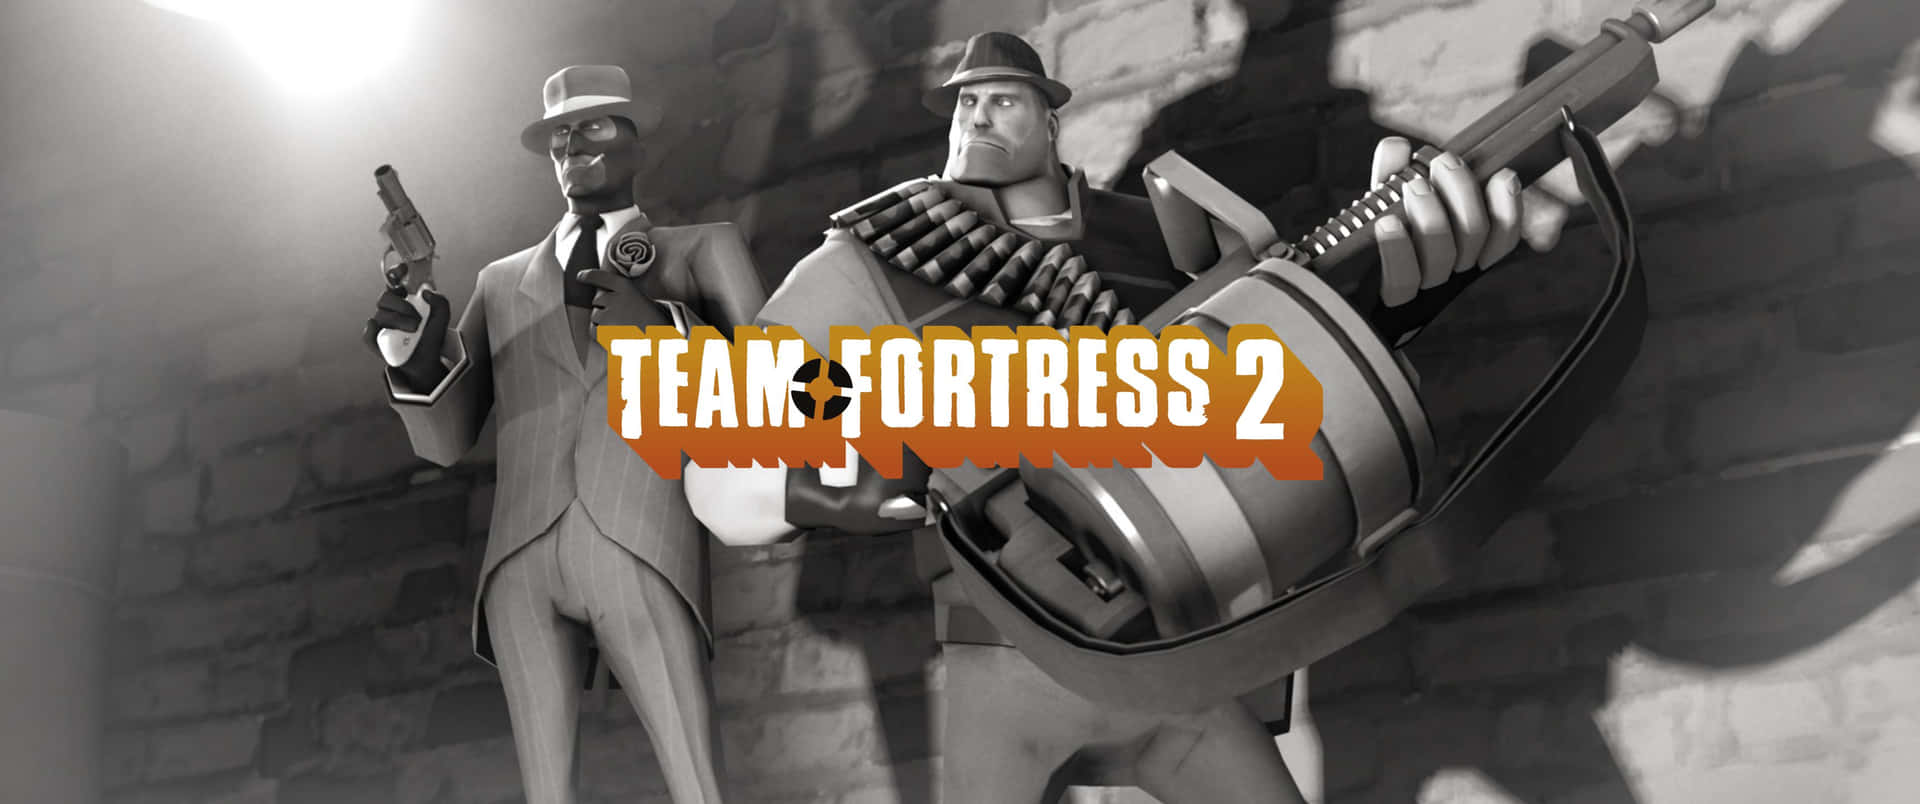 A wallpaper inspired by the popular video game, Team Fortress 2